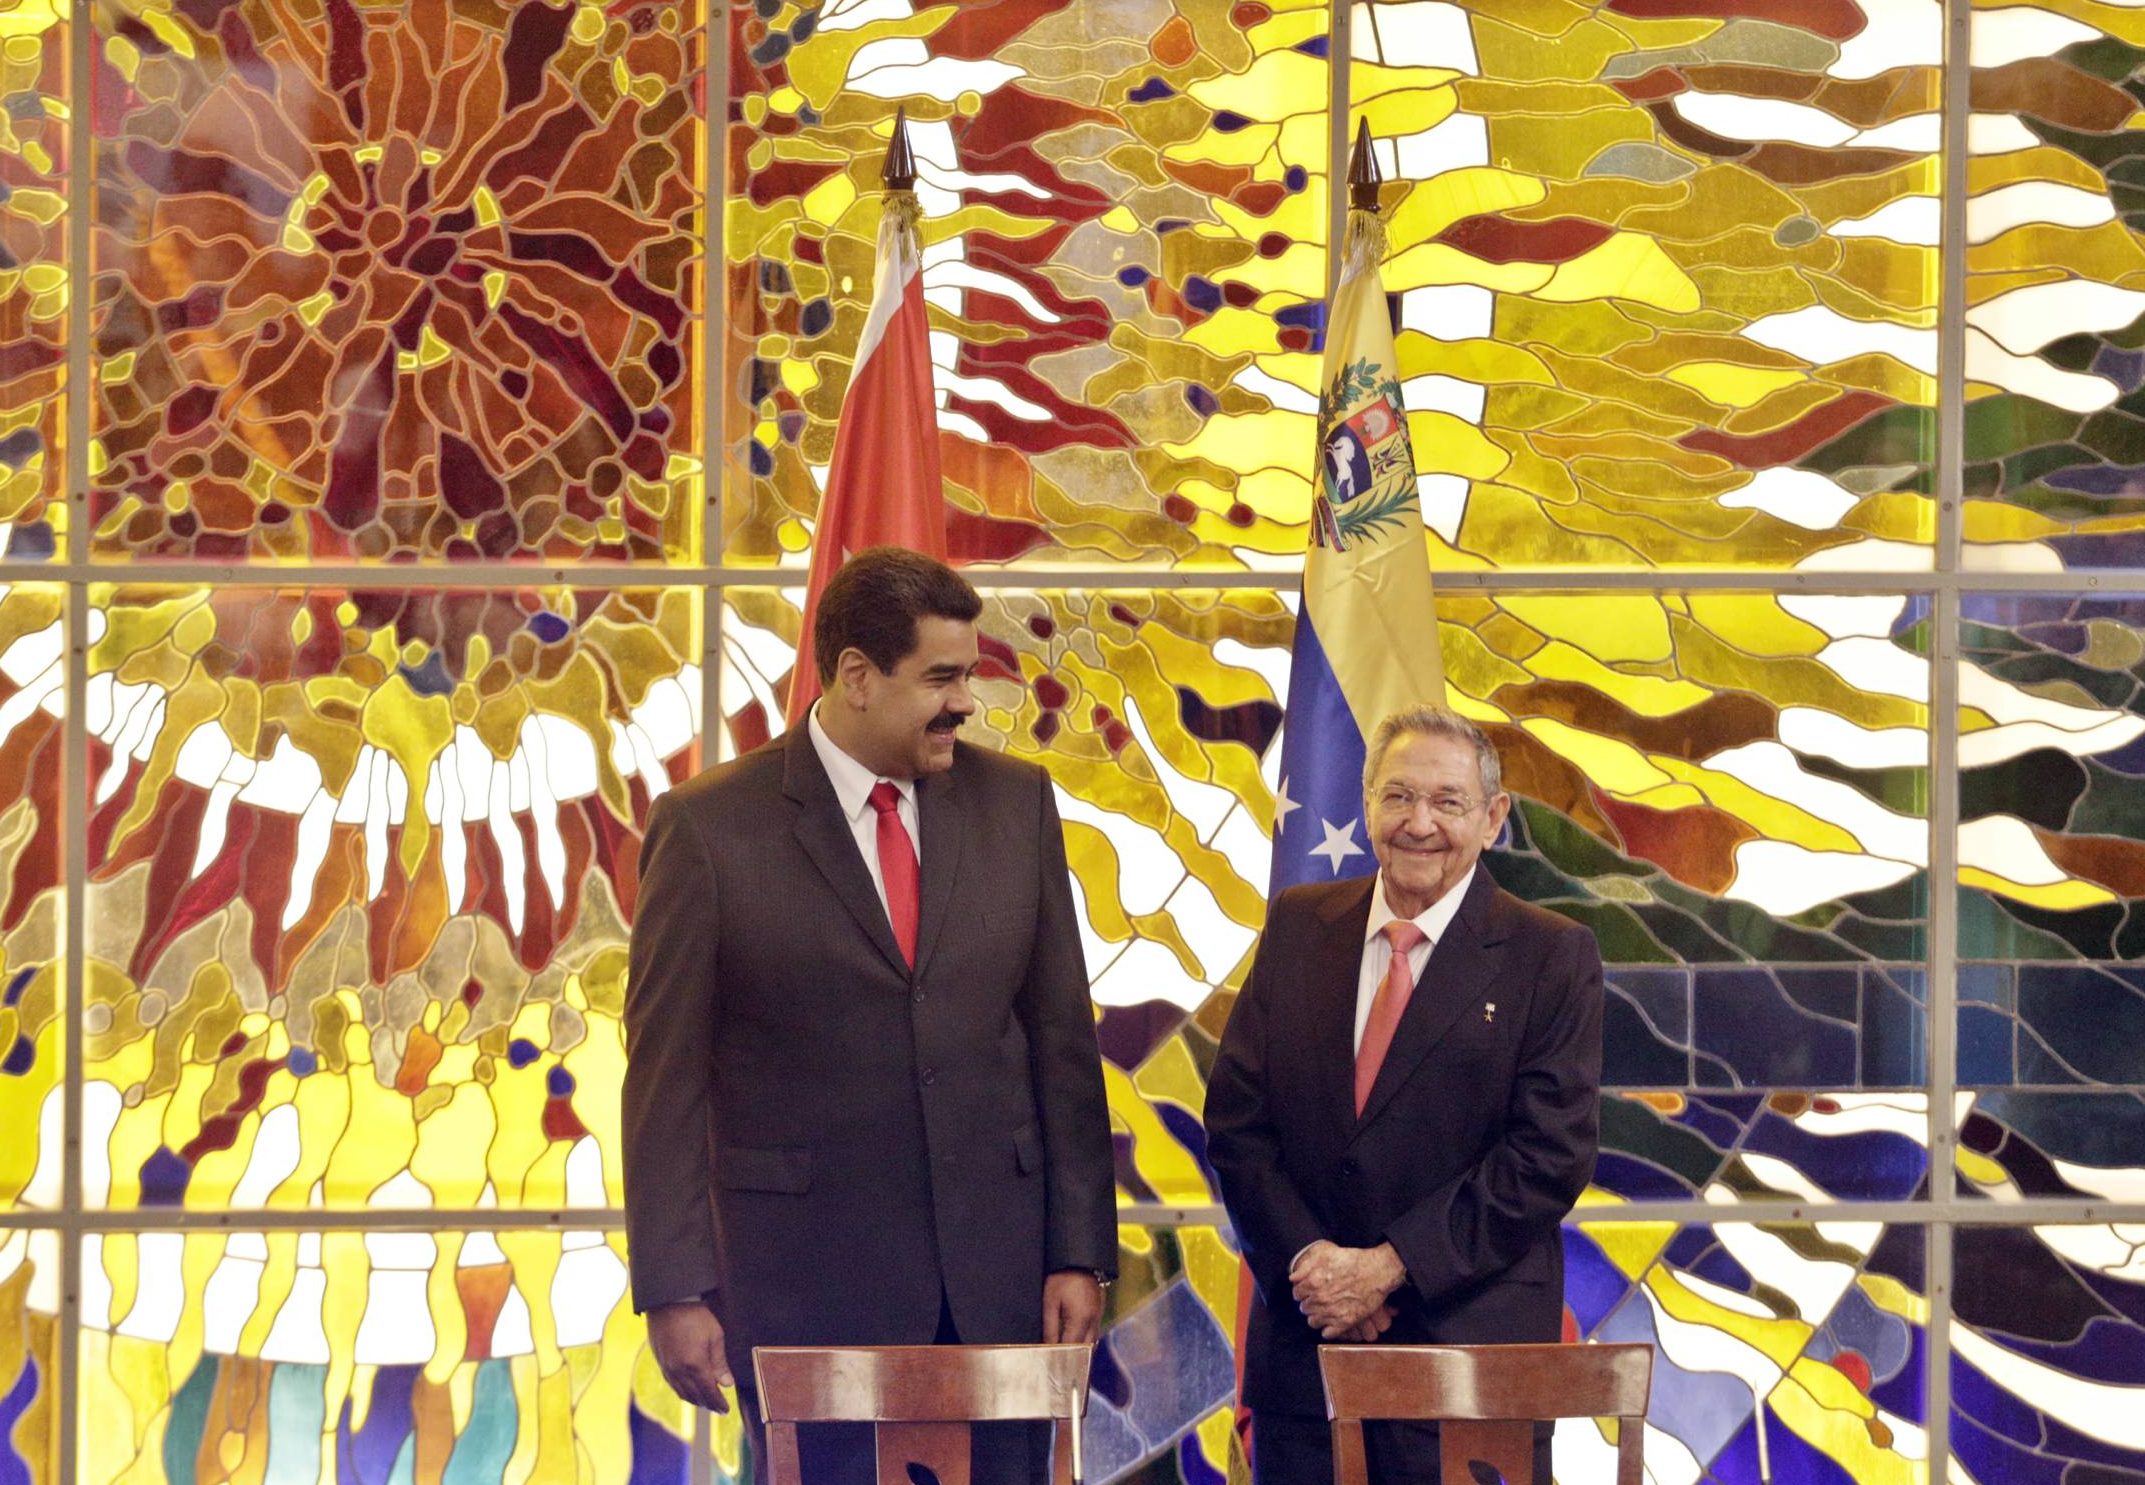 Cuban President Raul Castro (R) and President Nicolas Maduro of Venzuela attend an award  ceremony at the Cuban State Council on March 18, 2016 in Havana, Cuba. Maduro was awarded the Jose Marti medal, Cubas highest honor named after the Cuban revolutionary Marti.  (Photo by Sven Creutzmann/Mambo Photo/Getty Images)